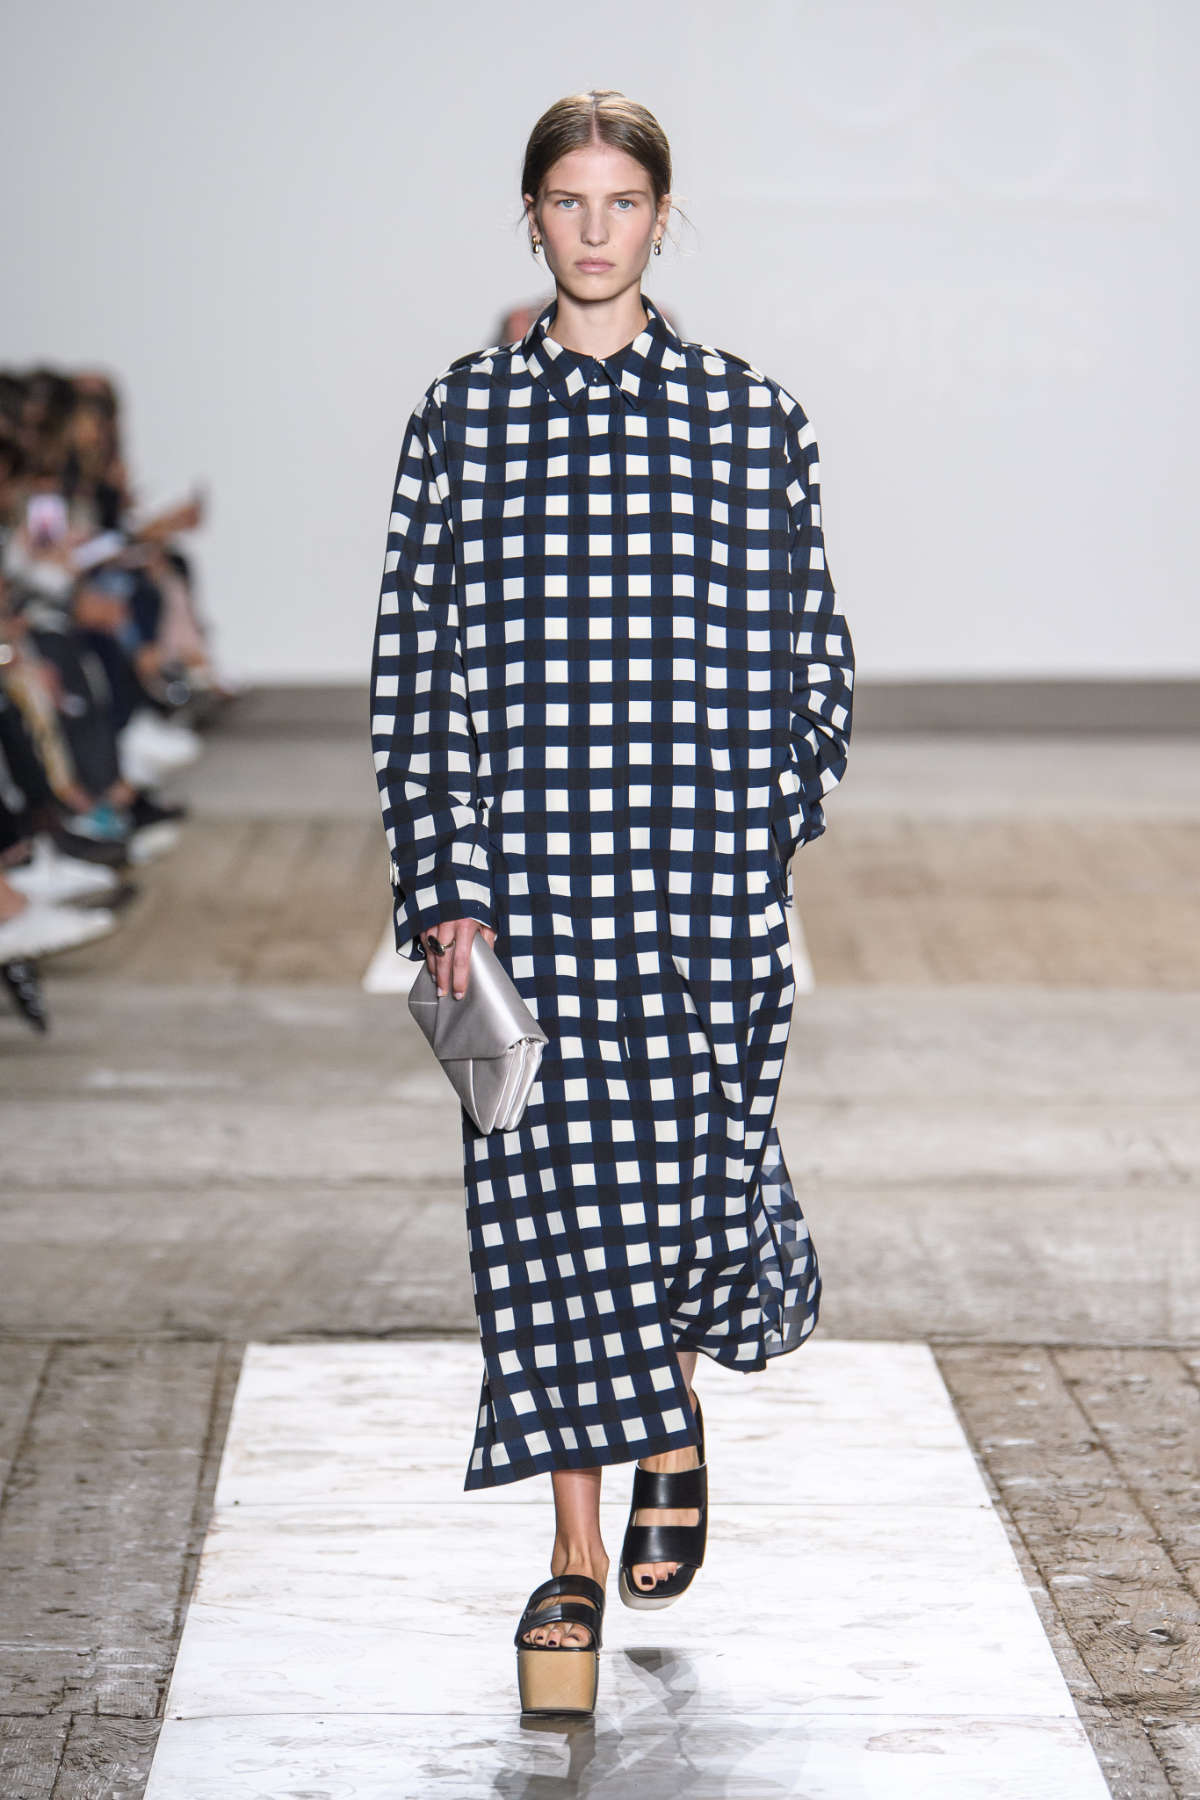 PORTS 1961 Presents Its New Spring-Summer 2023 Collection